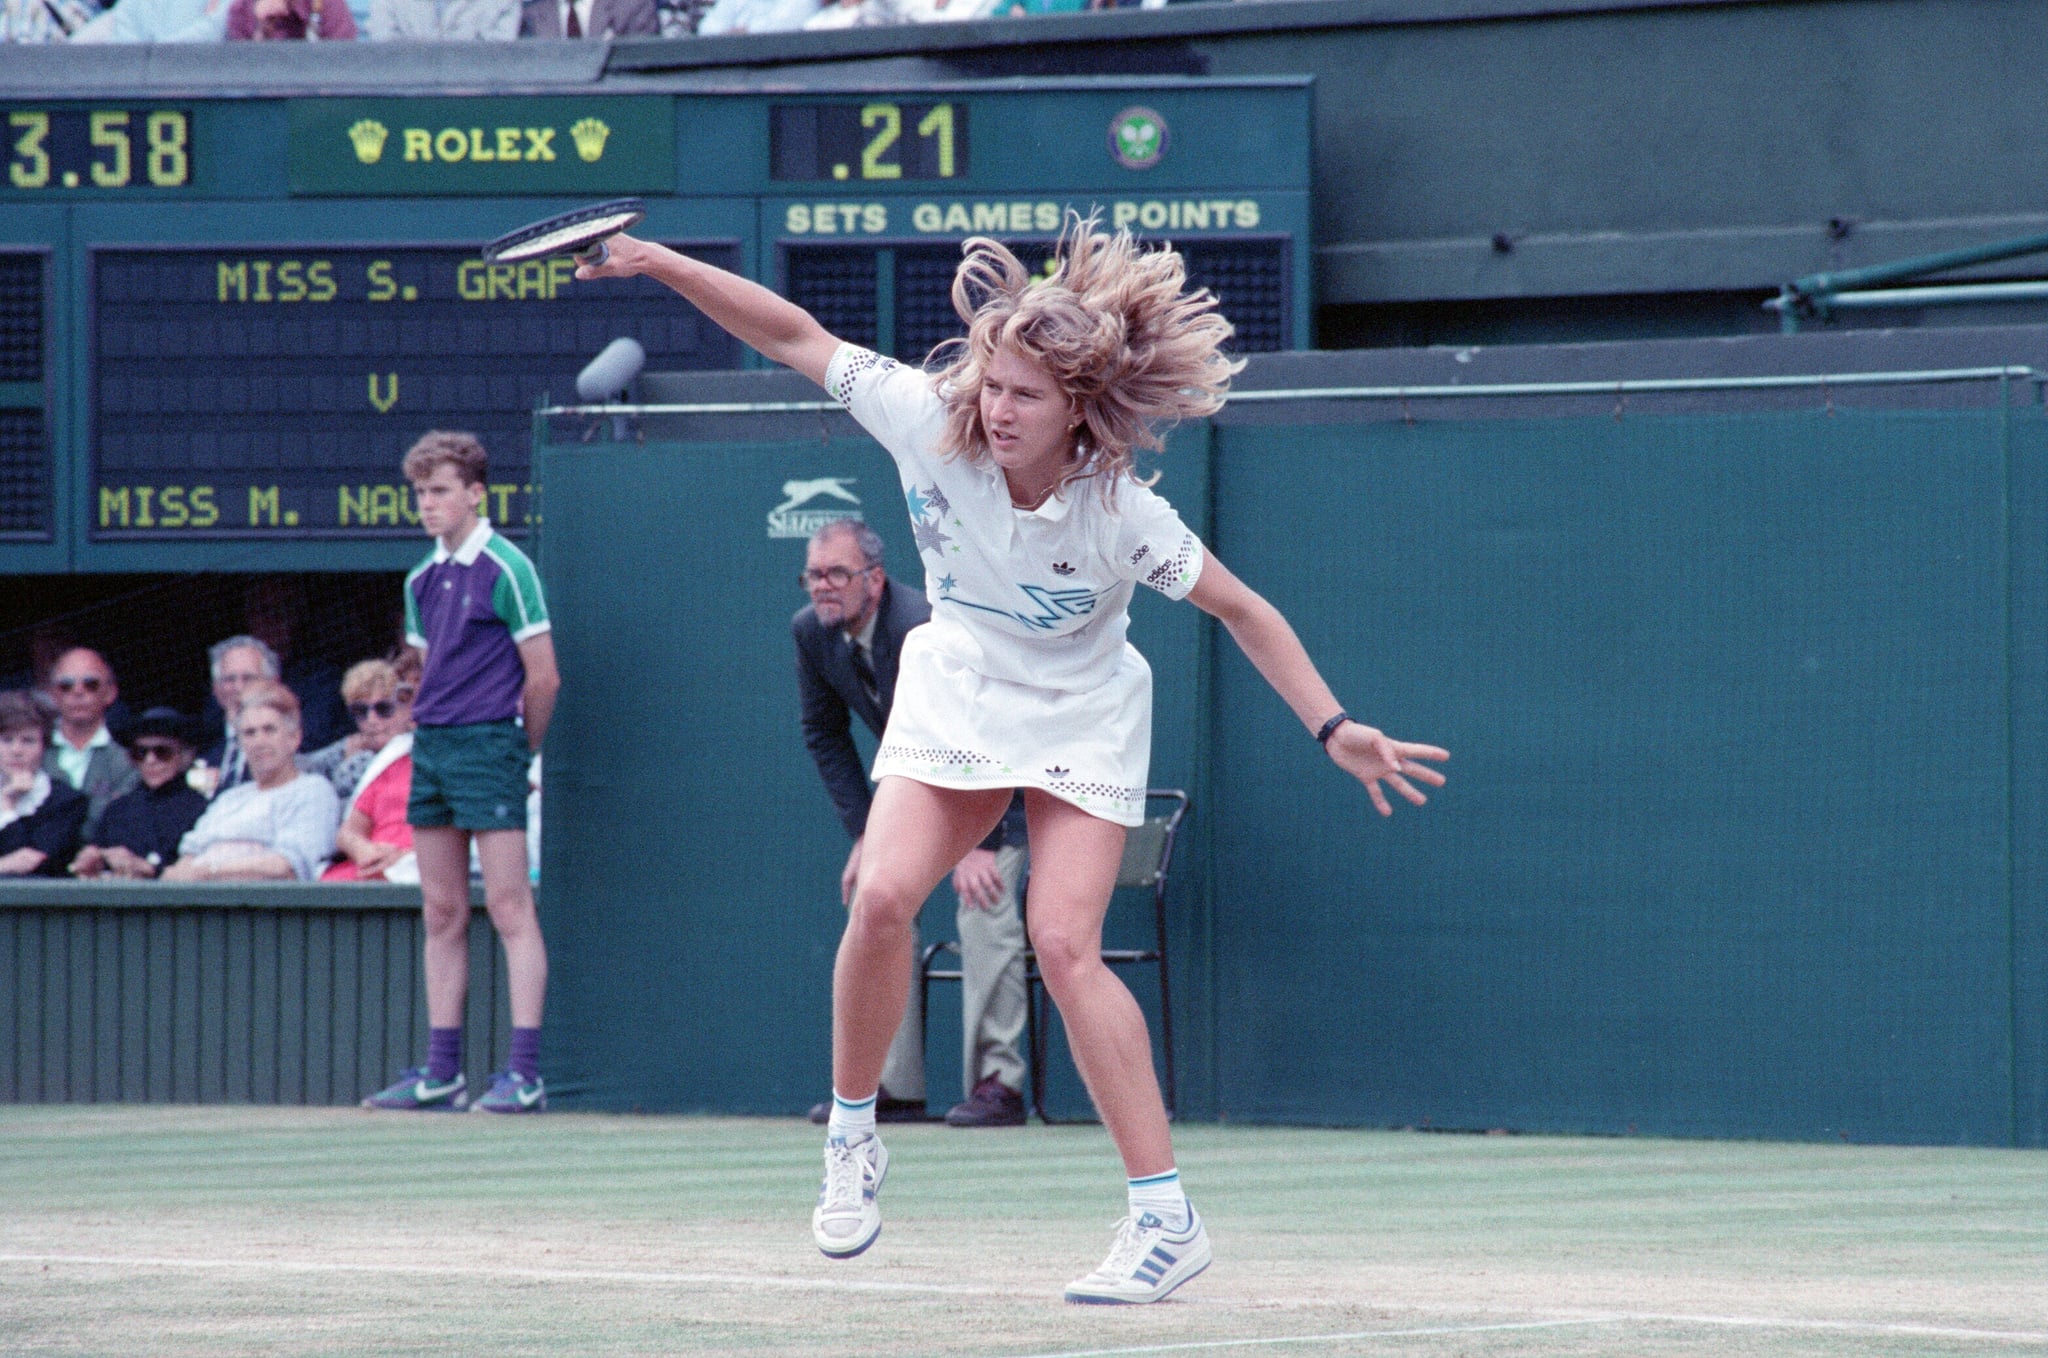 Steffi Graf pictured in action in the Wimbledon Ladies Singles Final on 2nd July 1988. Steffi Graf beats current 6 times defending champion Martina Navratilova, to win the Wimbledon Ladies Singles Final on 2nd July 1988. After Graf took a 5-3 lead in the first set, Navratilova won six straight games allowing her to win the first set and take a 2-0 lead in the second set. Graf then came back winning 12 of the next 13 games and the match. Steffi Graf's first of 7 Wimbledon singles title wins. 1988, 1989, 1991, 1992, 1993, 1995, 1996 Picture taken 2nd July 1988. (Photo by Alan Olley and Tony Ward/Mirrorpix/Getty Images)